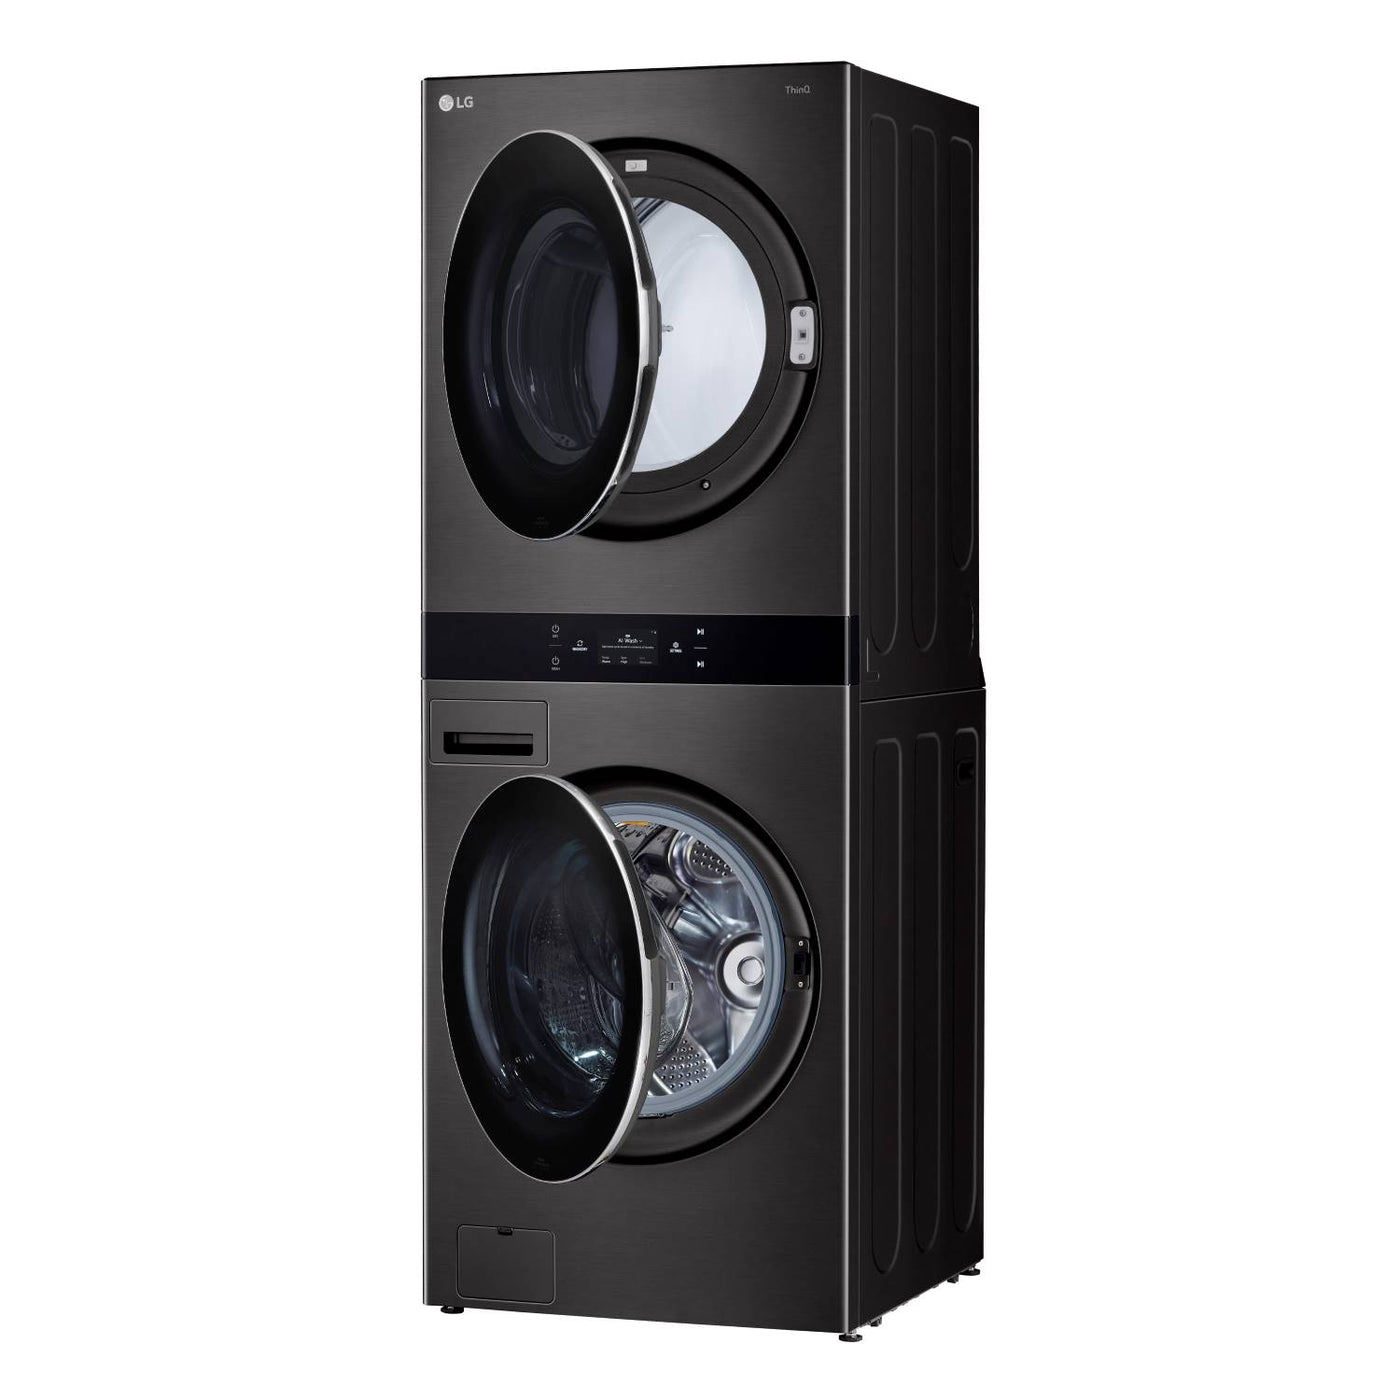 LG Black Single Unit Wash Tower™ with Center Control® Front Load Washer (5.8 cu. ft.) and Dryer (7.4 cu. ft.) - WKEX300HBA